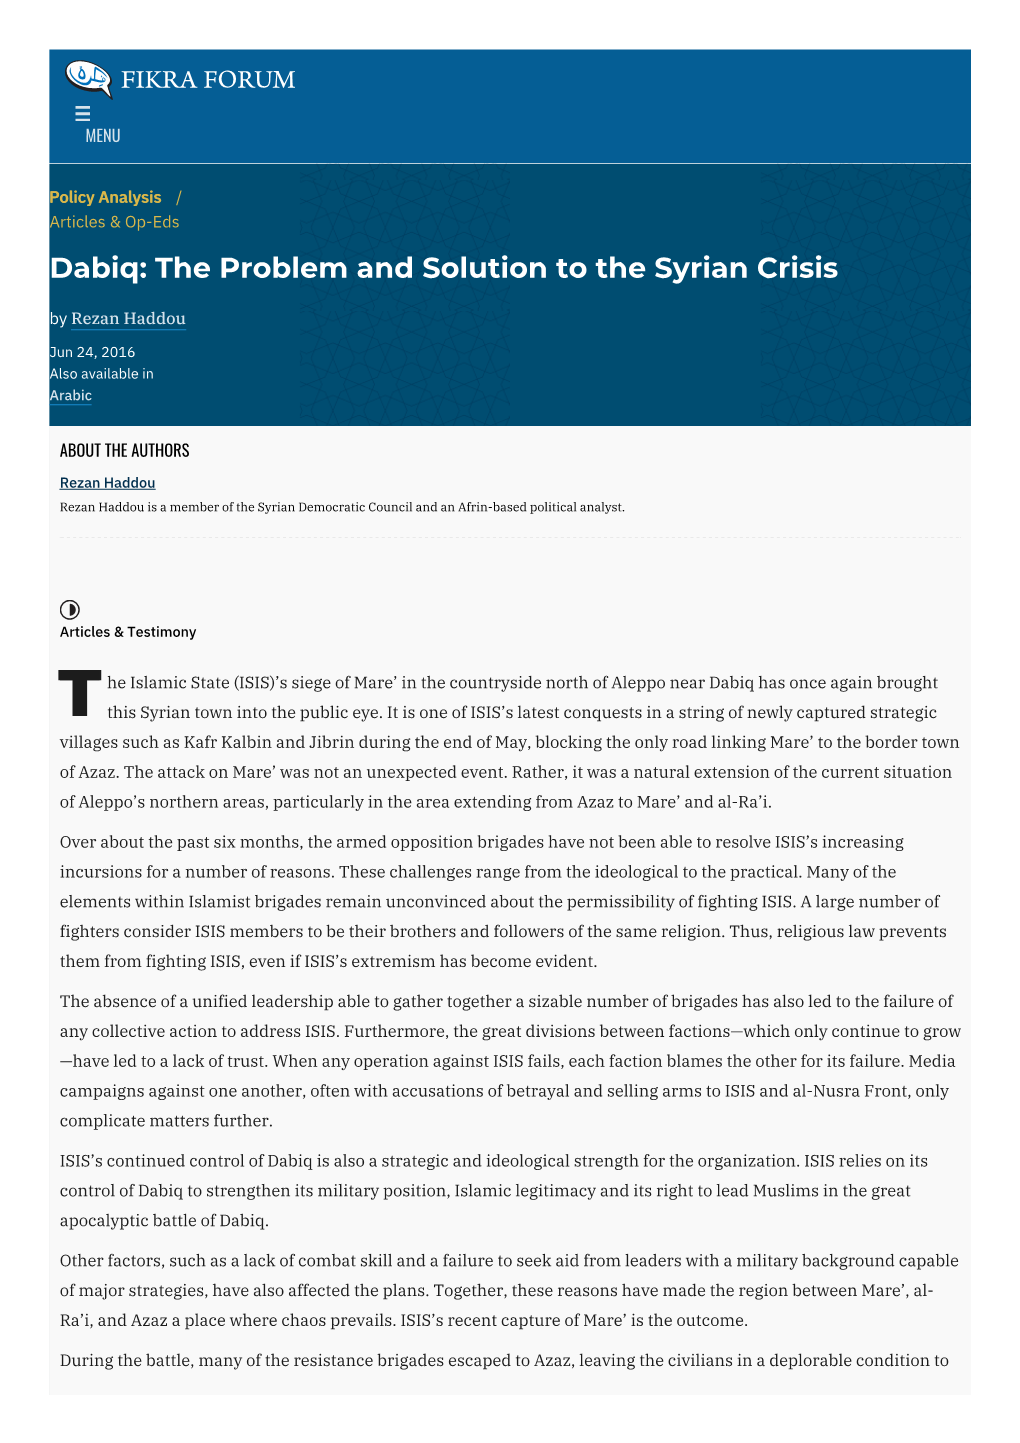 Dabiq: the Problem and Solution to the Syrian Crisis by Rezan Haddou